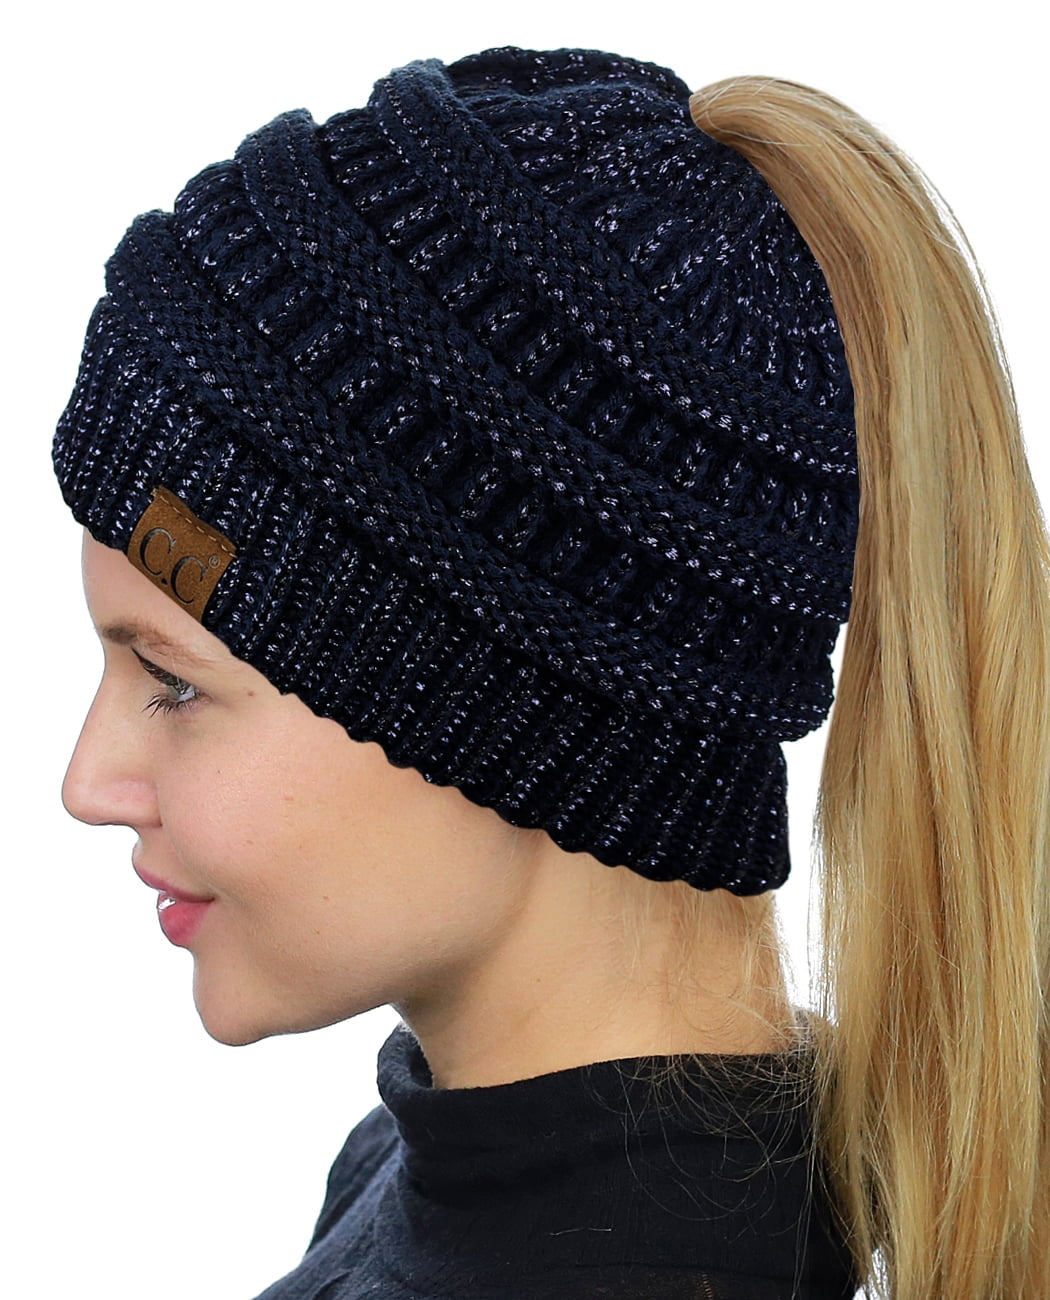 C.C BeanieTail Soft Stretch Cable Knit Messy High Bun Ponytail Beanie Hat 